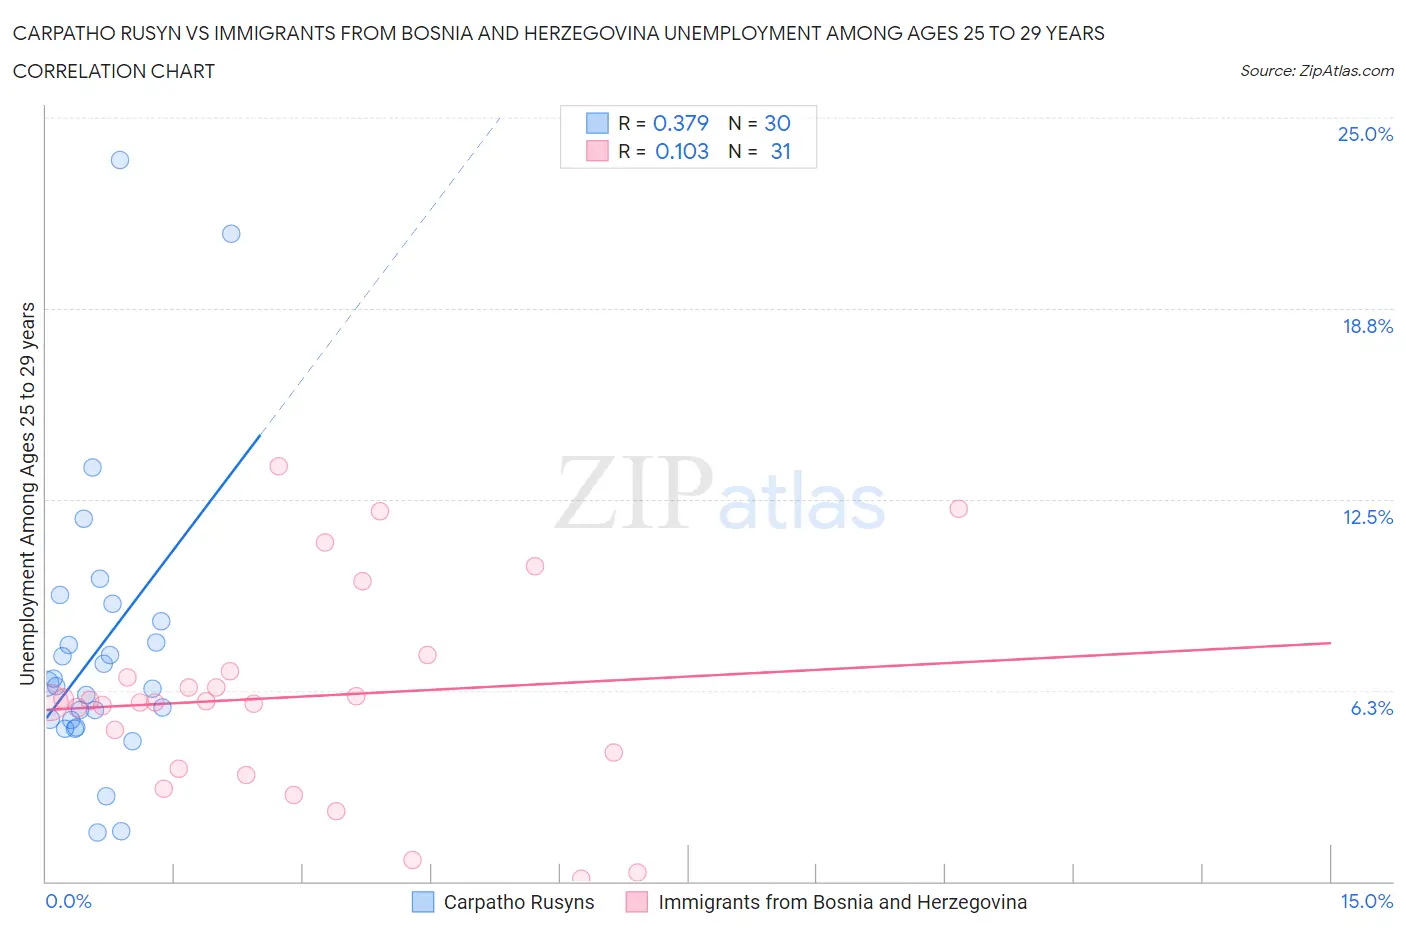 Carpatho Rusyn vs Immigrants from Bosnia and Herzegovina Unemployment Among Ages 25 to 29 years